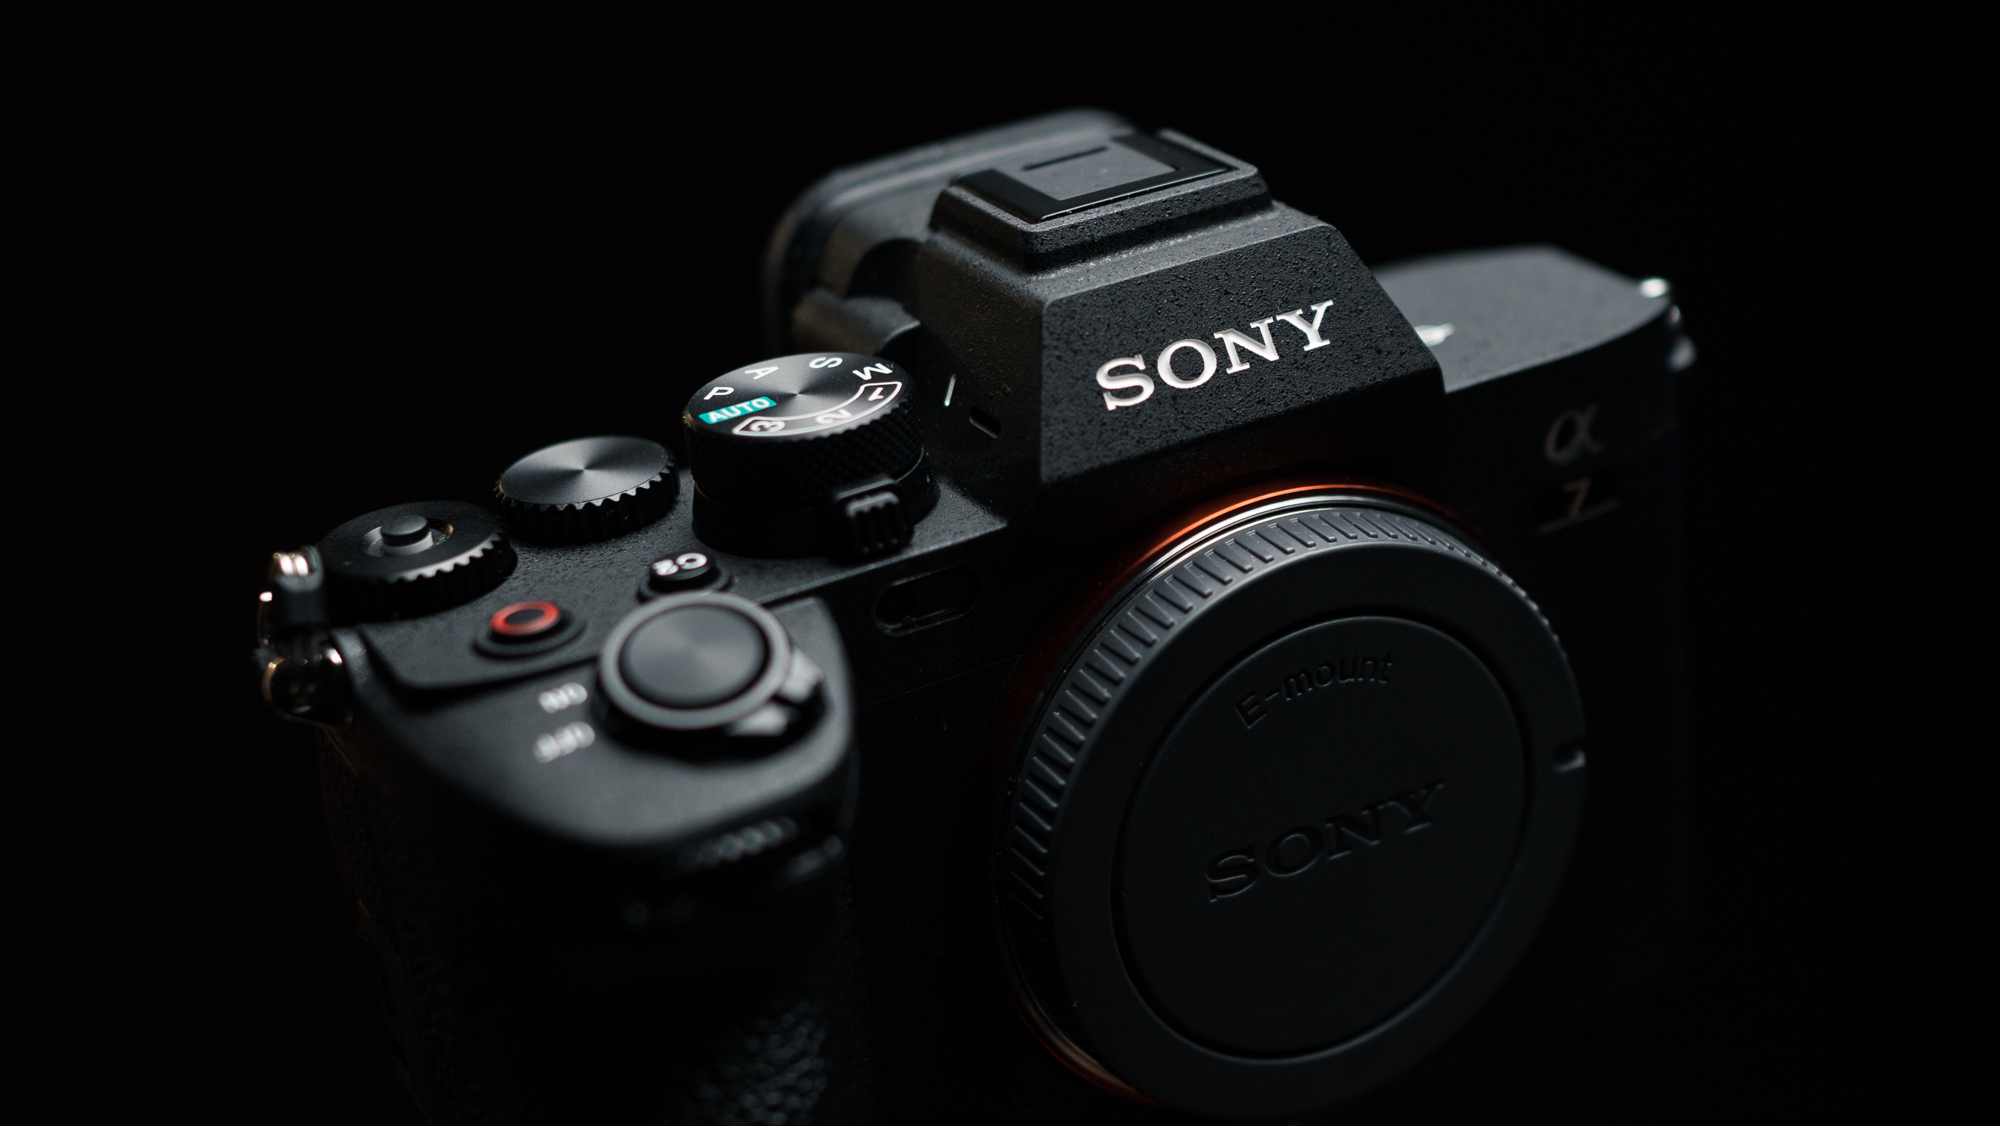 A Look at the Design and Ergonomics of the New Sony A7 IV